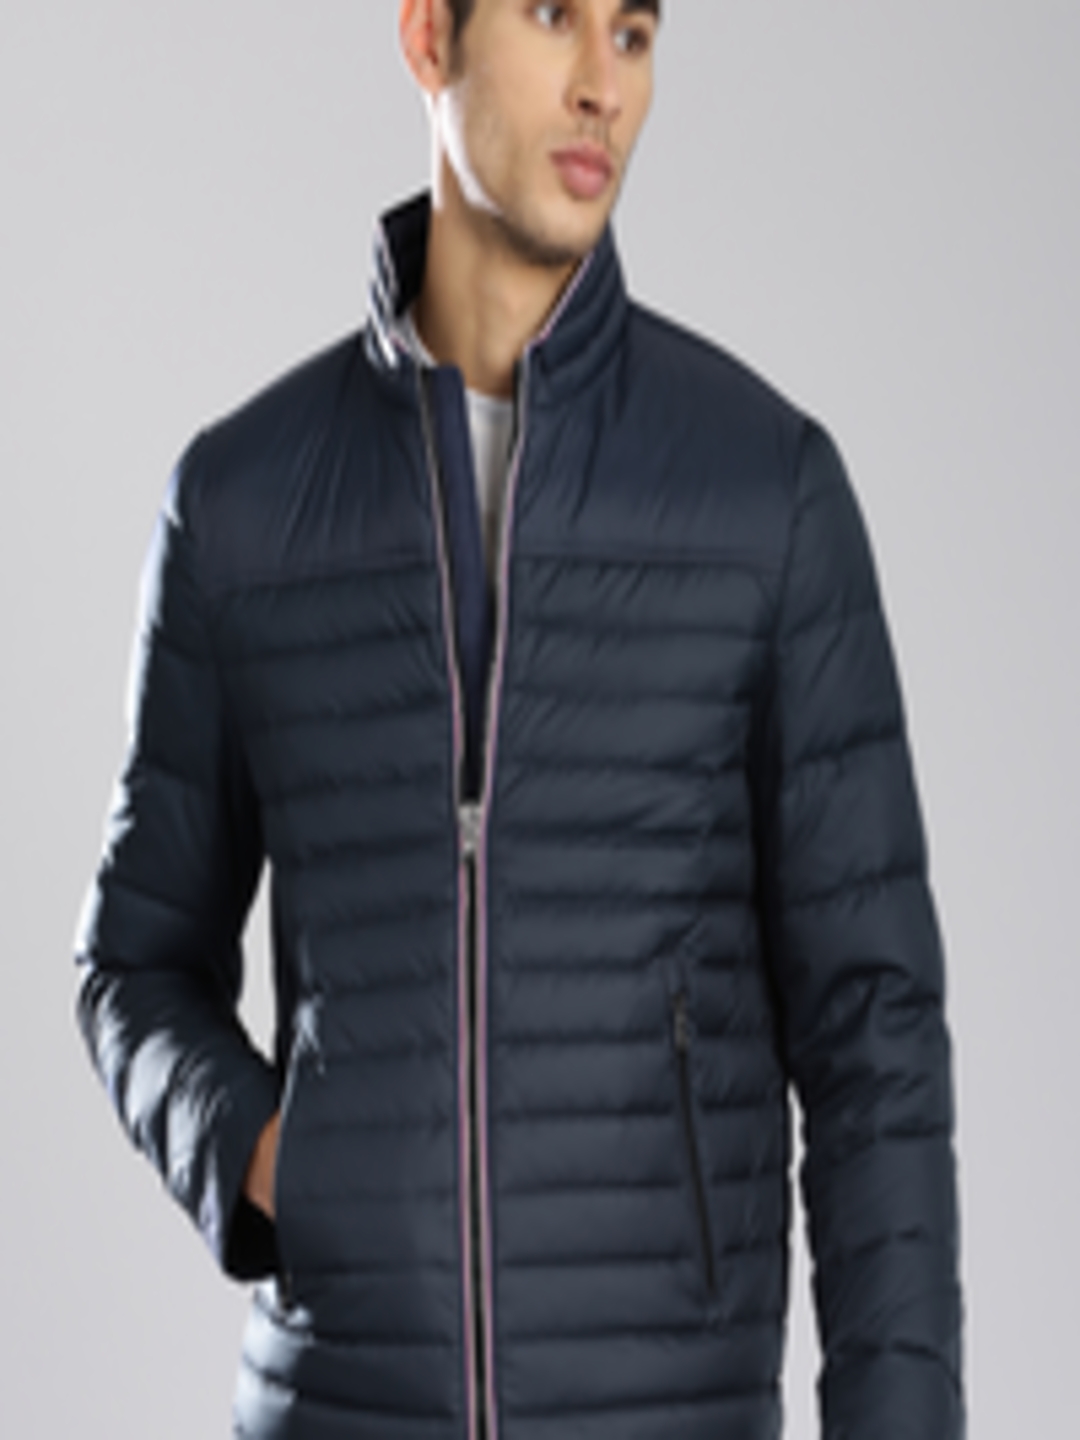 Buy Tommy Hilfiger Navy Quilted Jacket - Jackets for Men 1473631 | Myntra